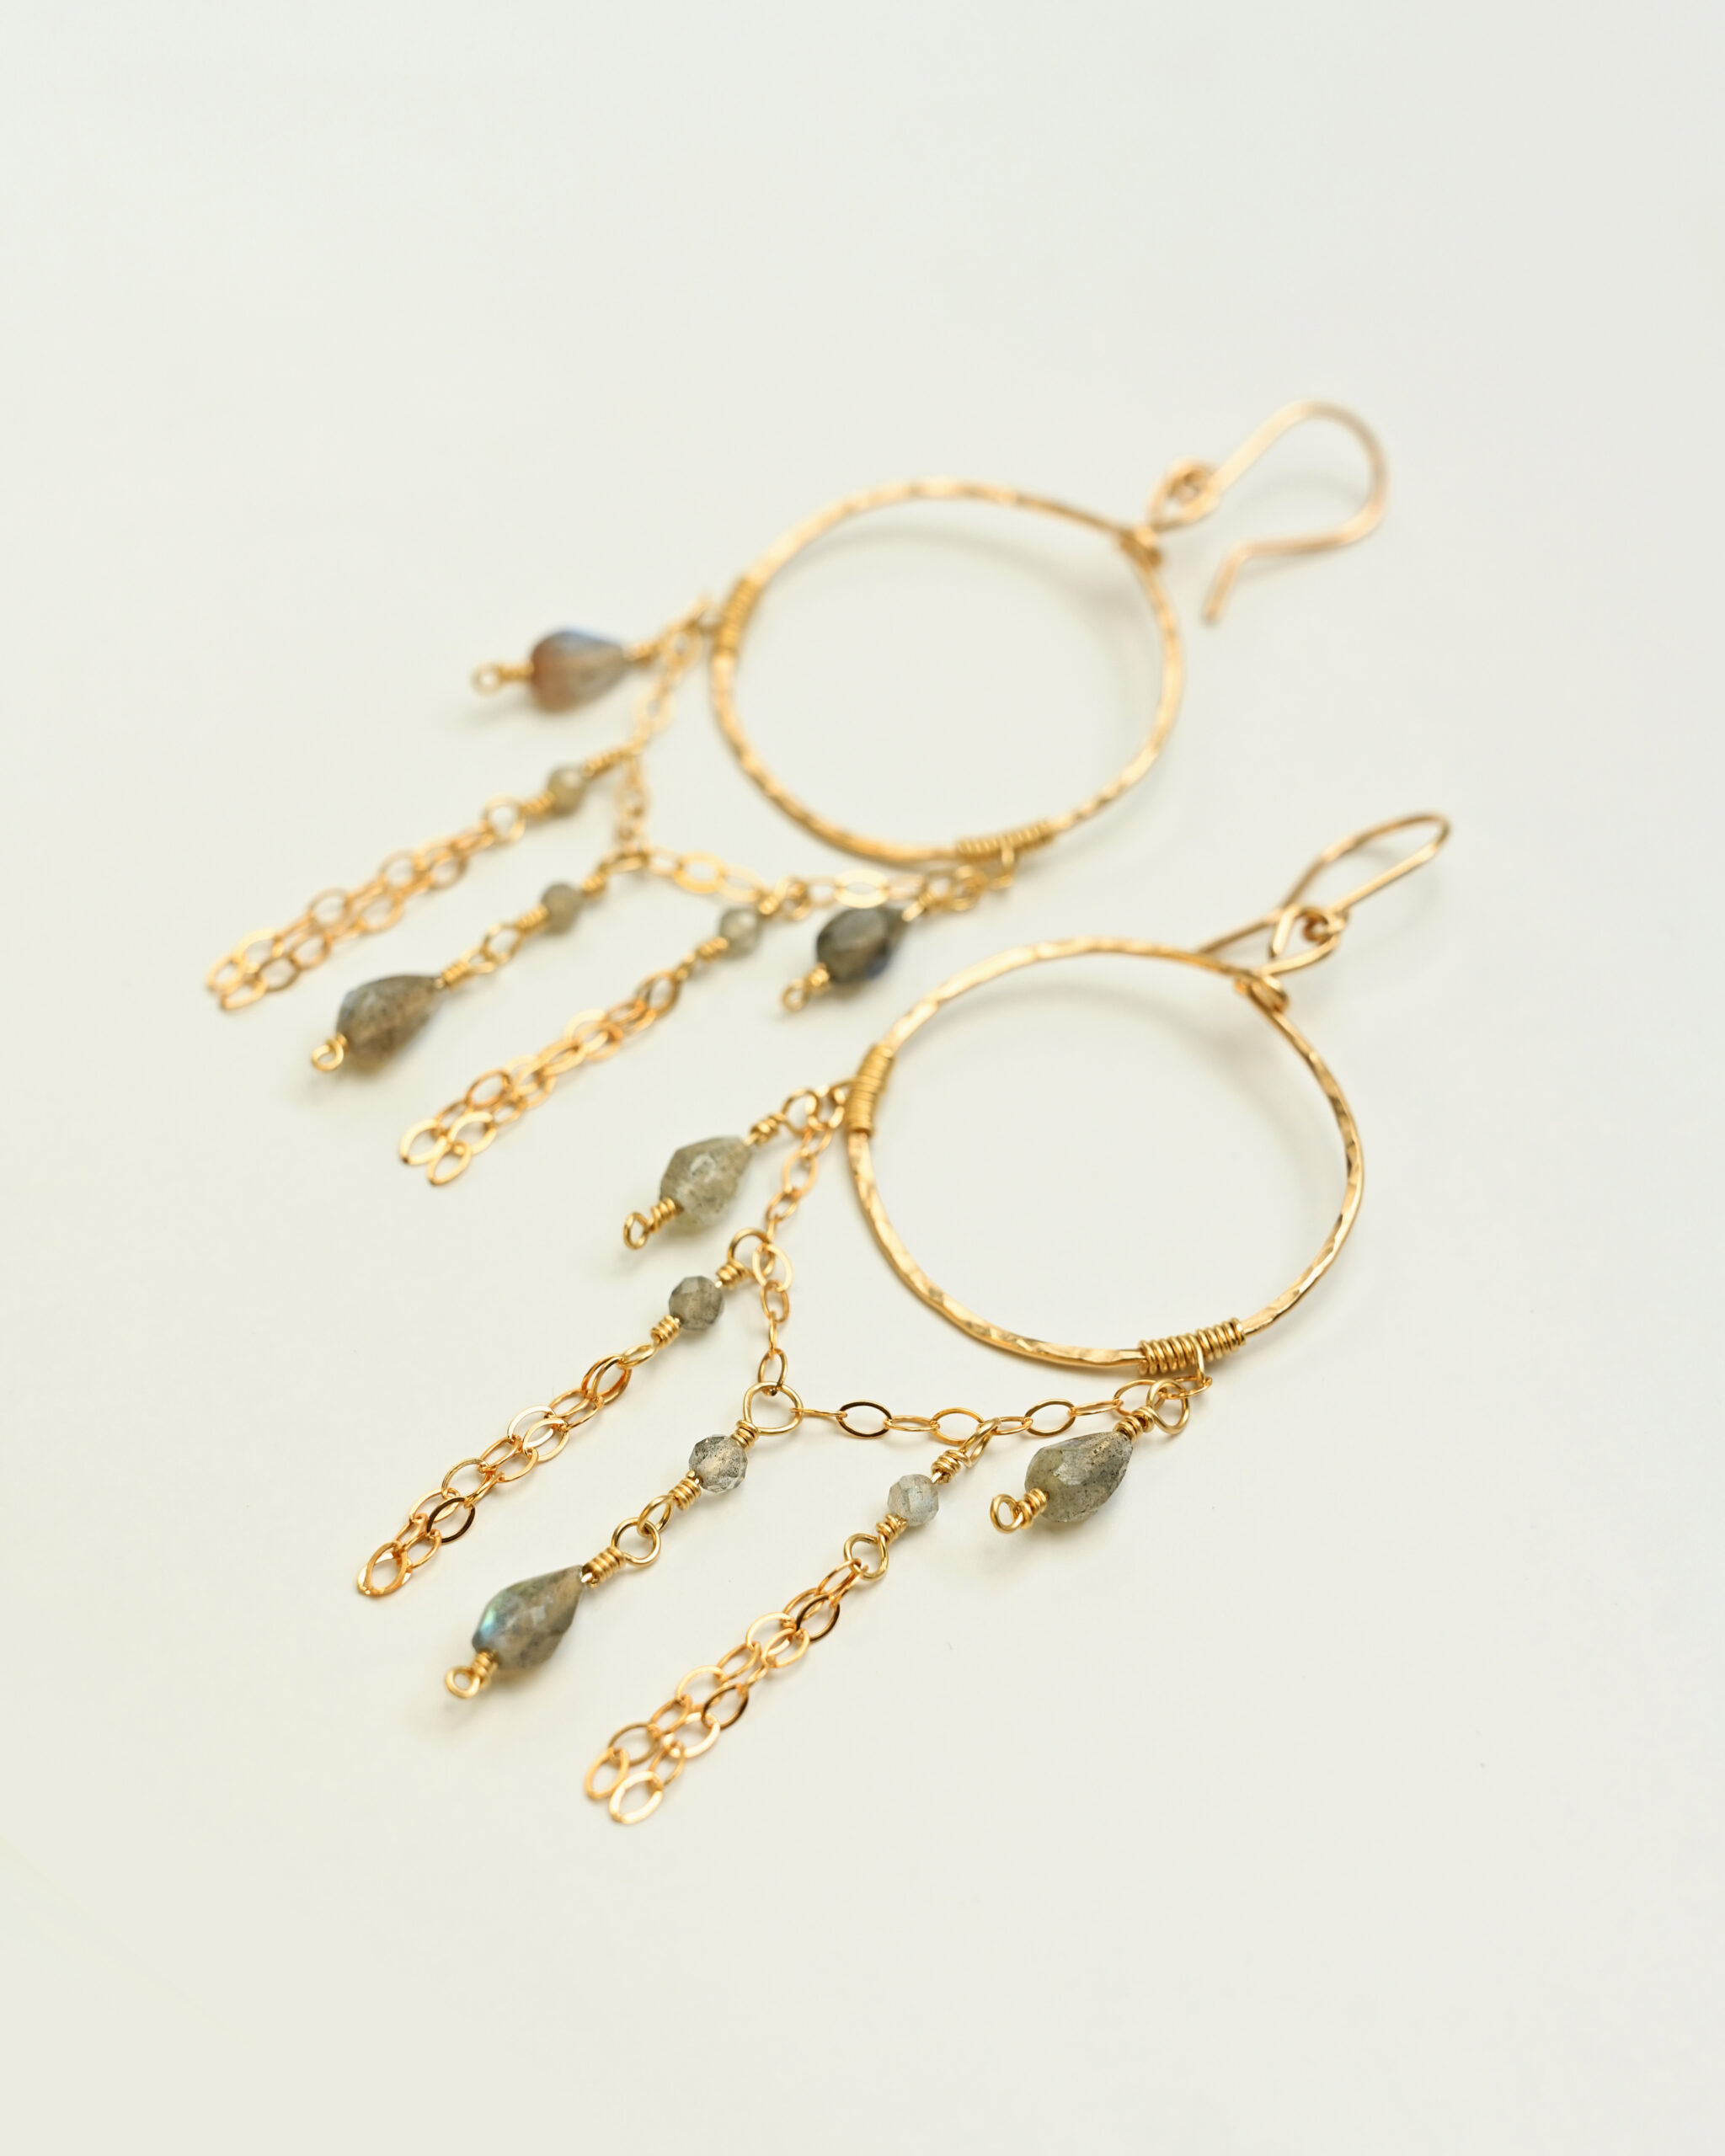 14k gold filled drop earrings with labradorite and chains